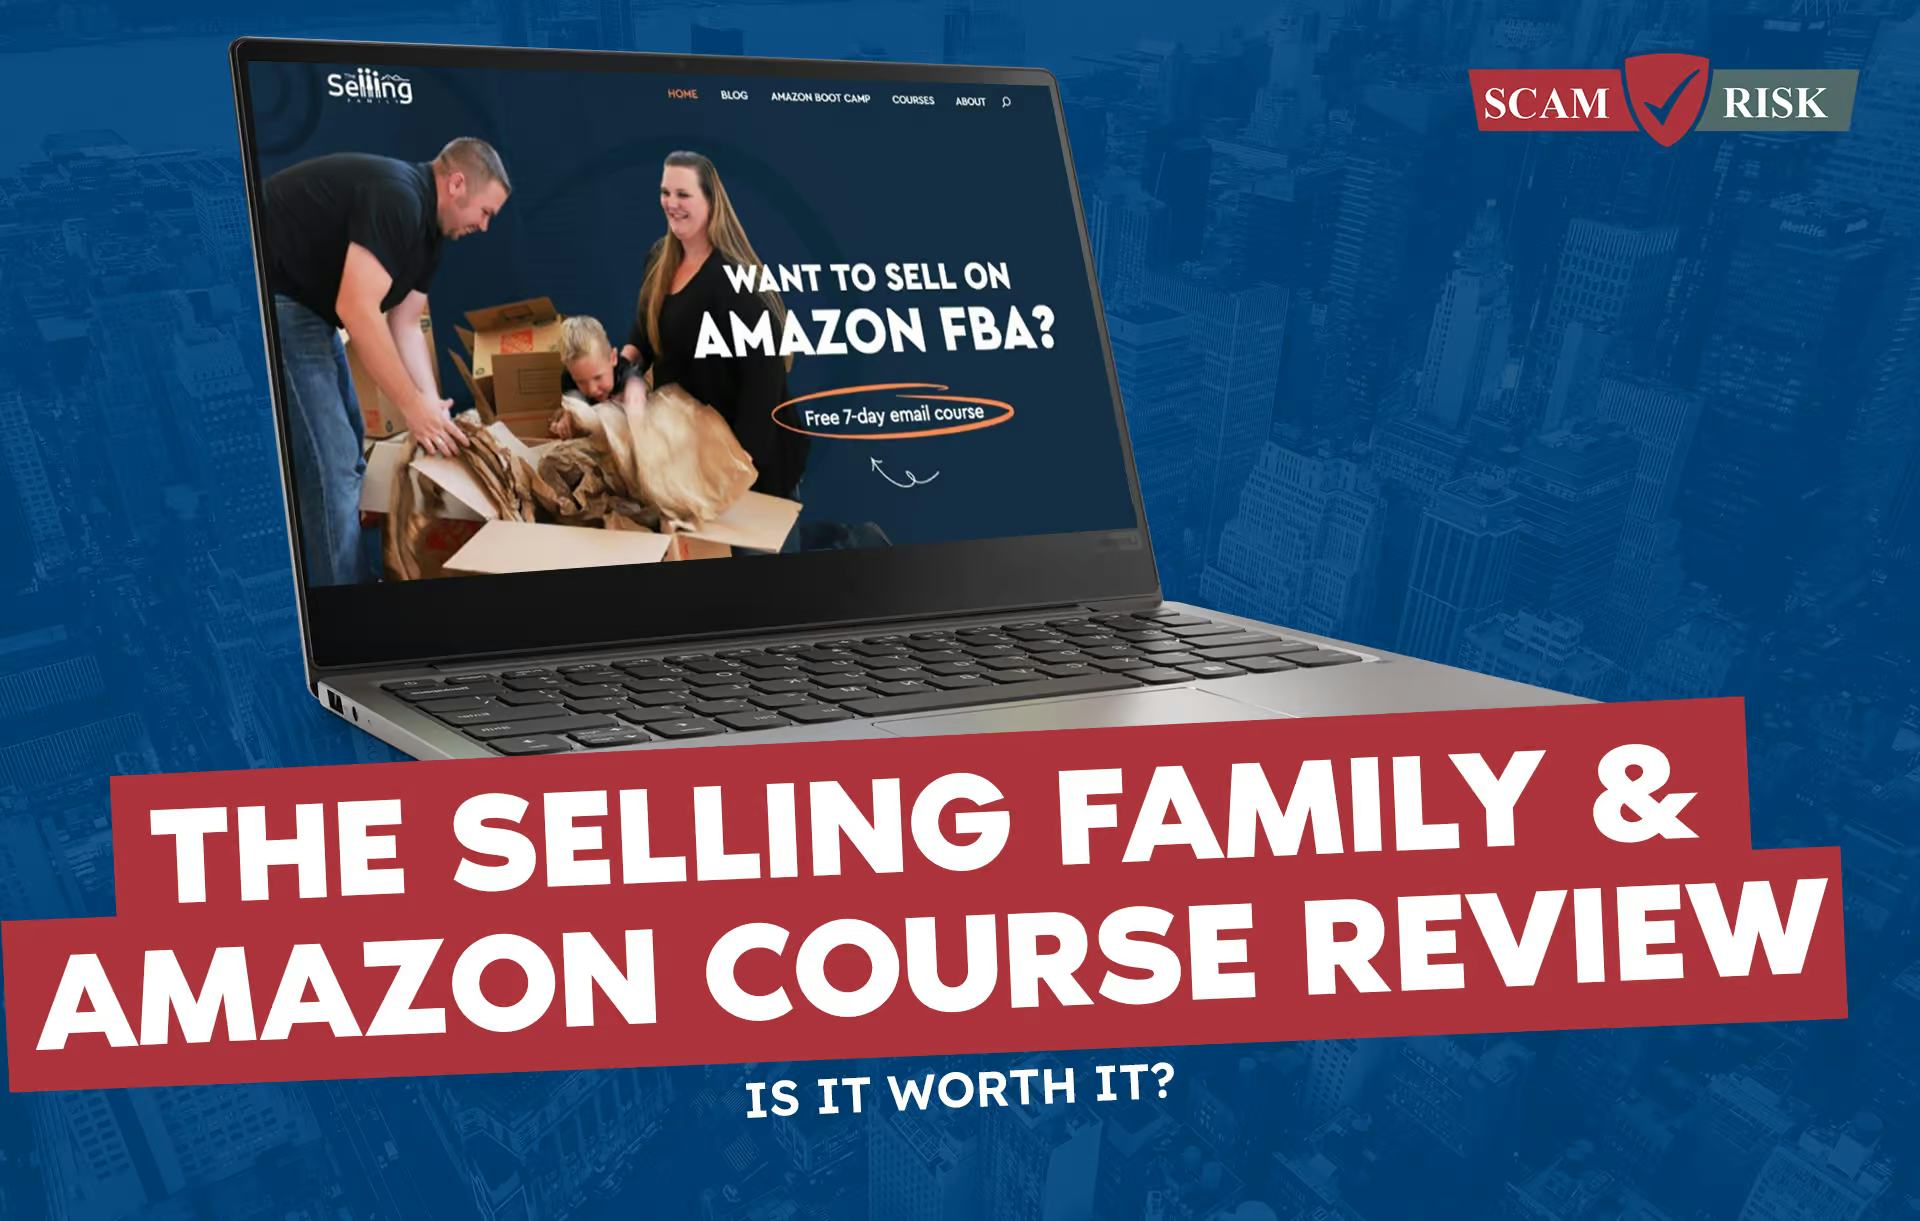 The Selling Family Reviews